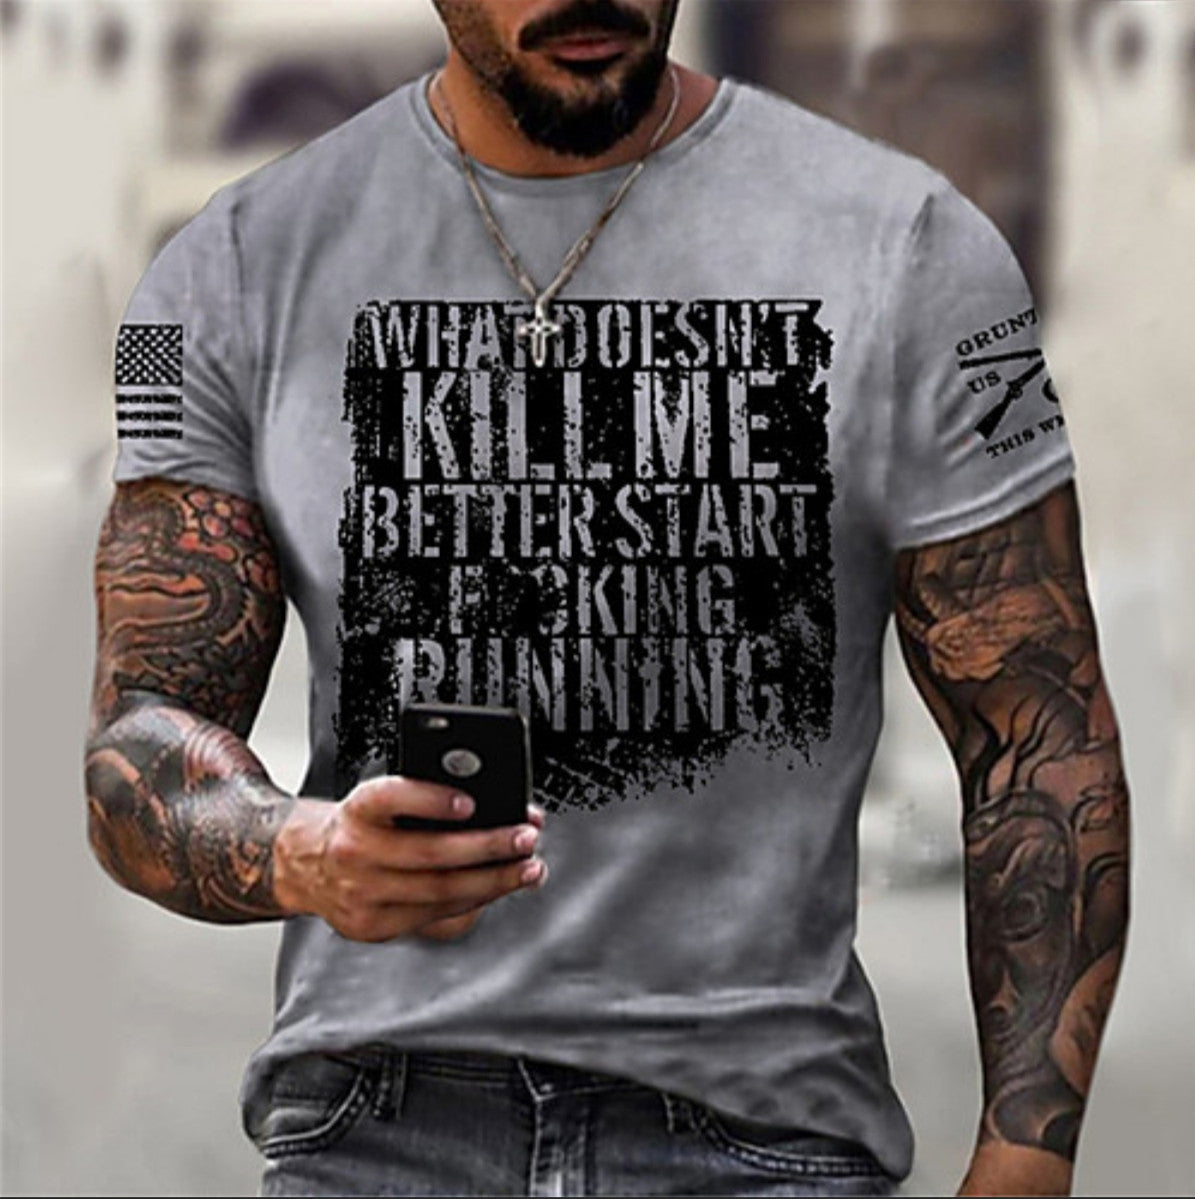 Printed T-Shirt For Men-Deluxe Fashion Forever